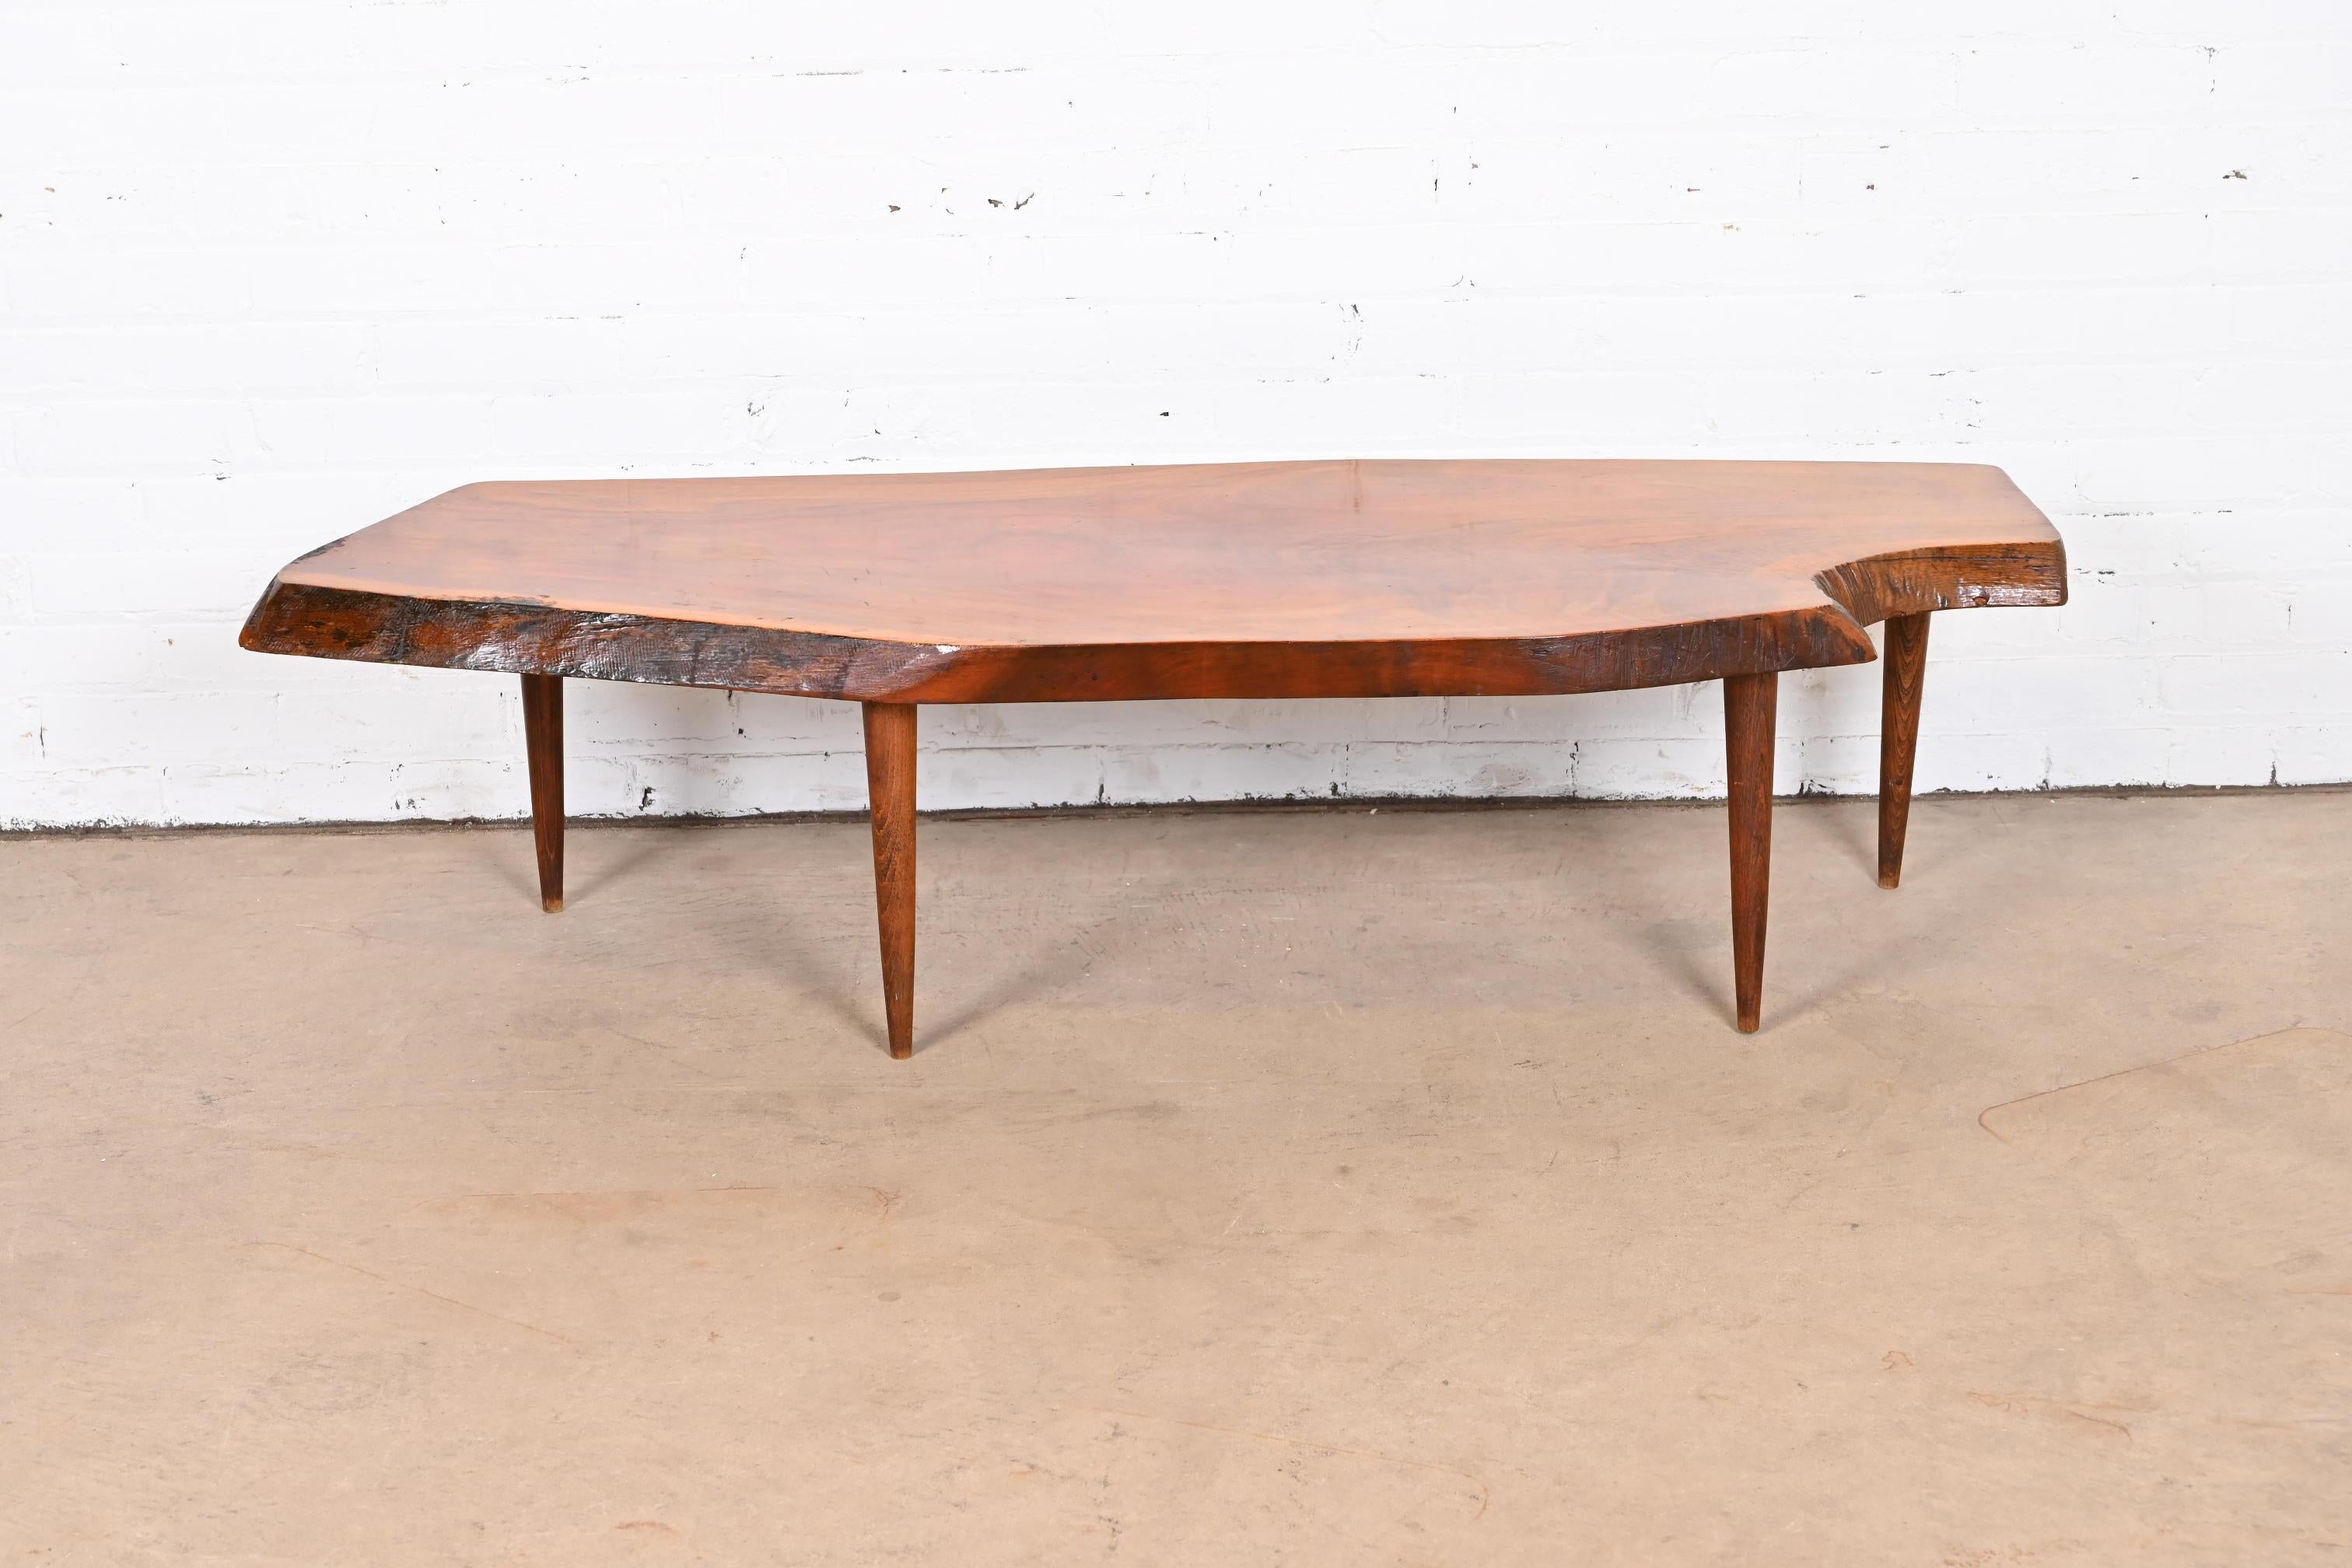 A gorgeous mid-century Organic Modern freeform walnut slab coffee table

In the style of George Nakashima

USA, 1960s

Measures: 57.75